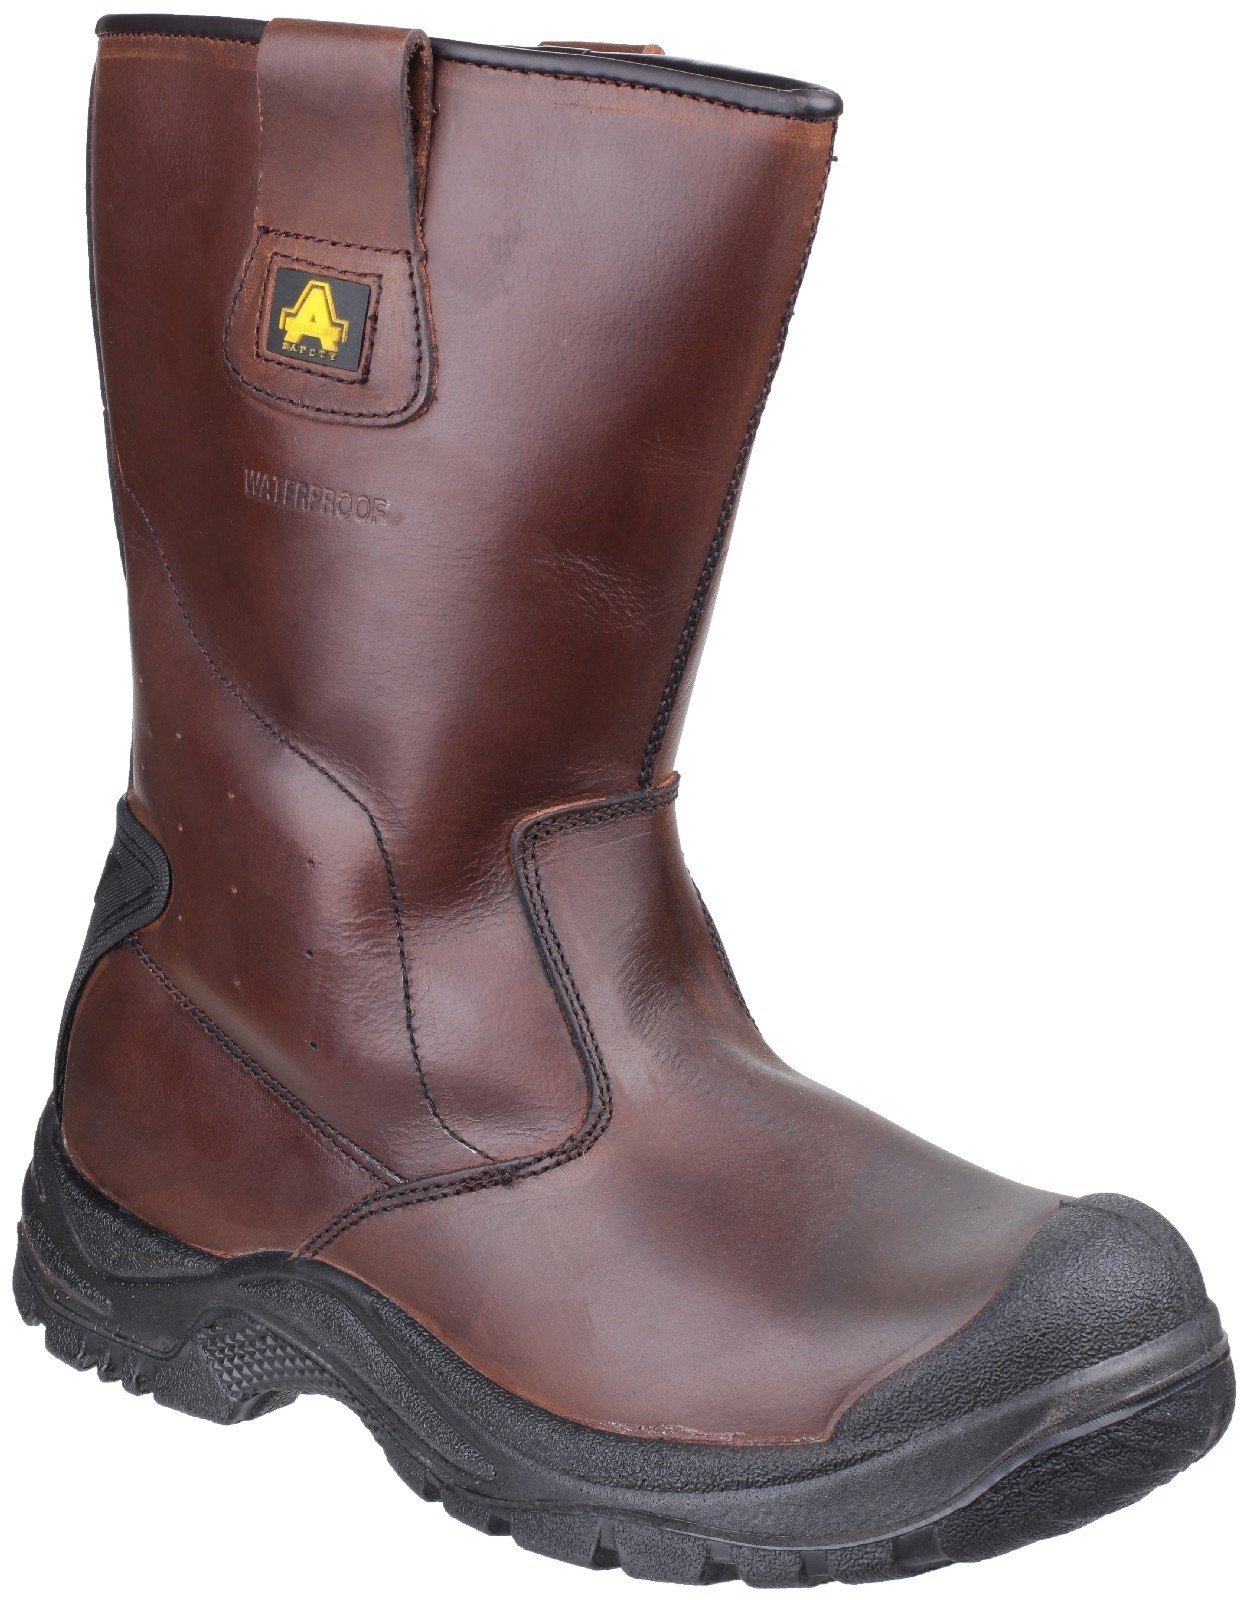 Amblers Unisex Safety Cadair Waterproof Pull on Rigger Boot Brown 24340 - Brown 12